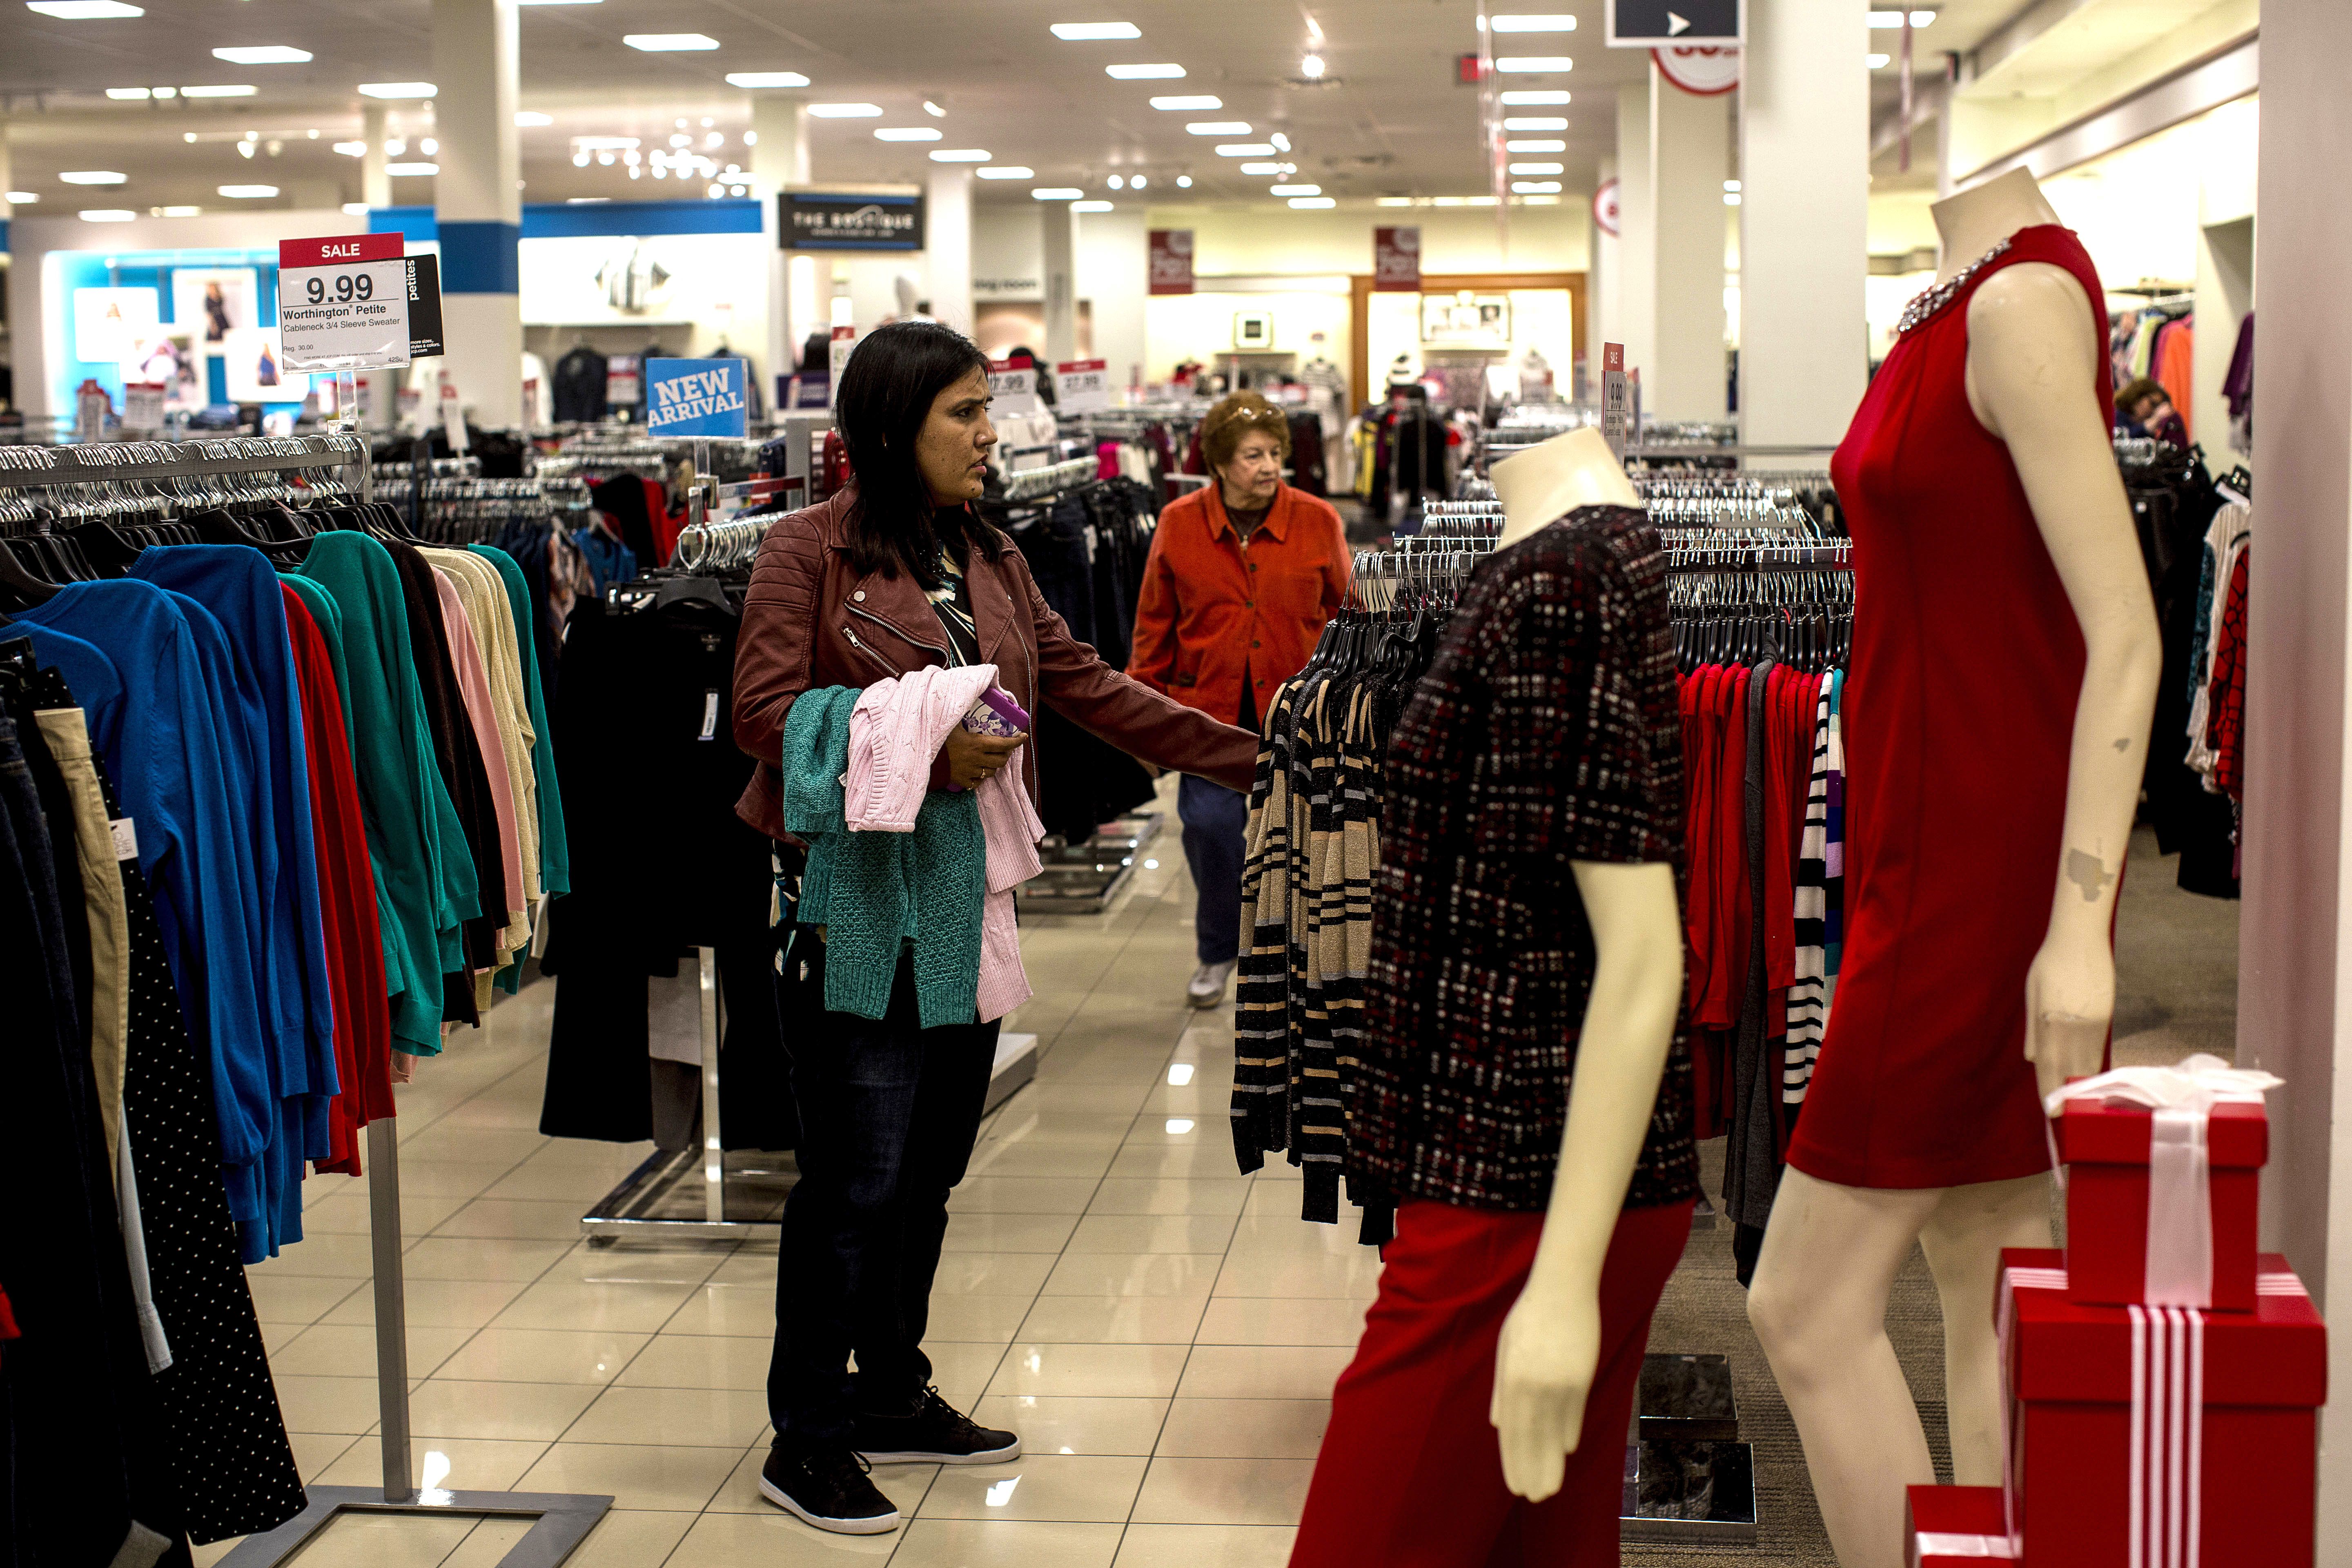 Department stores could have a 'sobering' Christmas, analyst warns